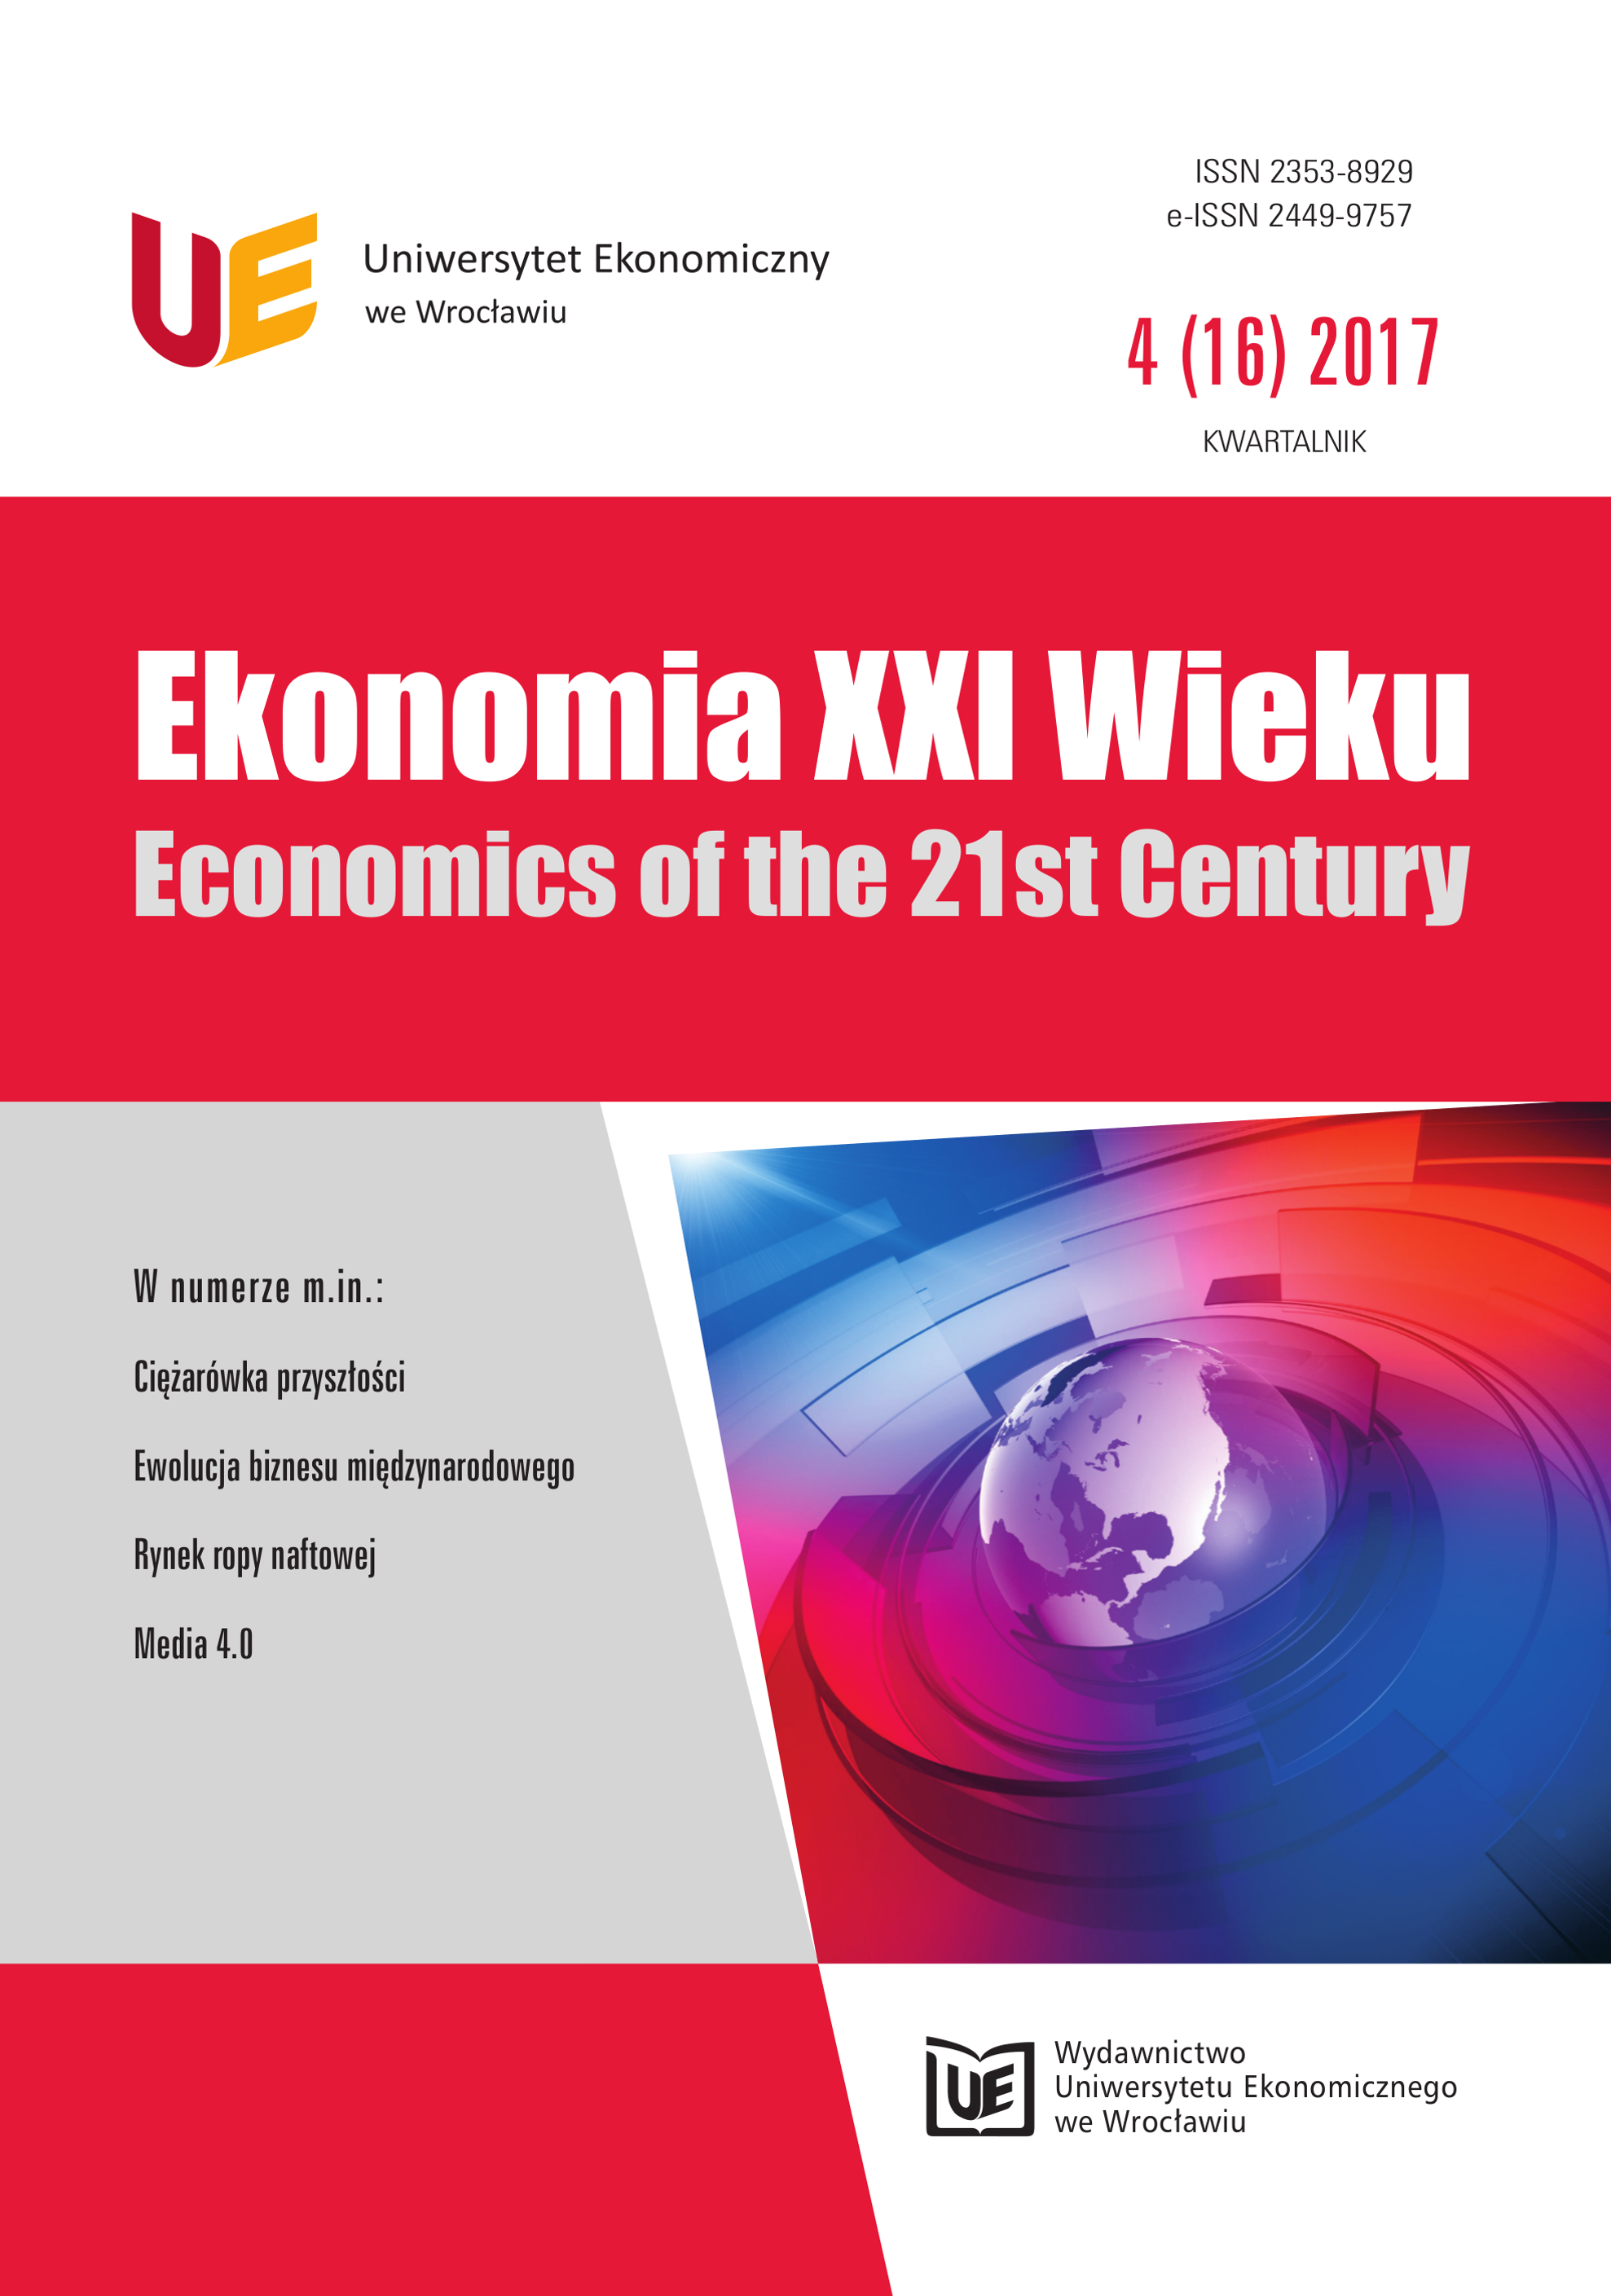 Hedging in the market risk management of transnational corporations on the example of KGHM Polska Miedź S.A. Cover Image